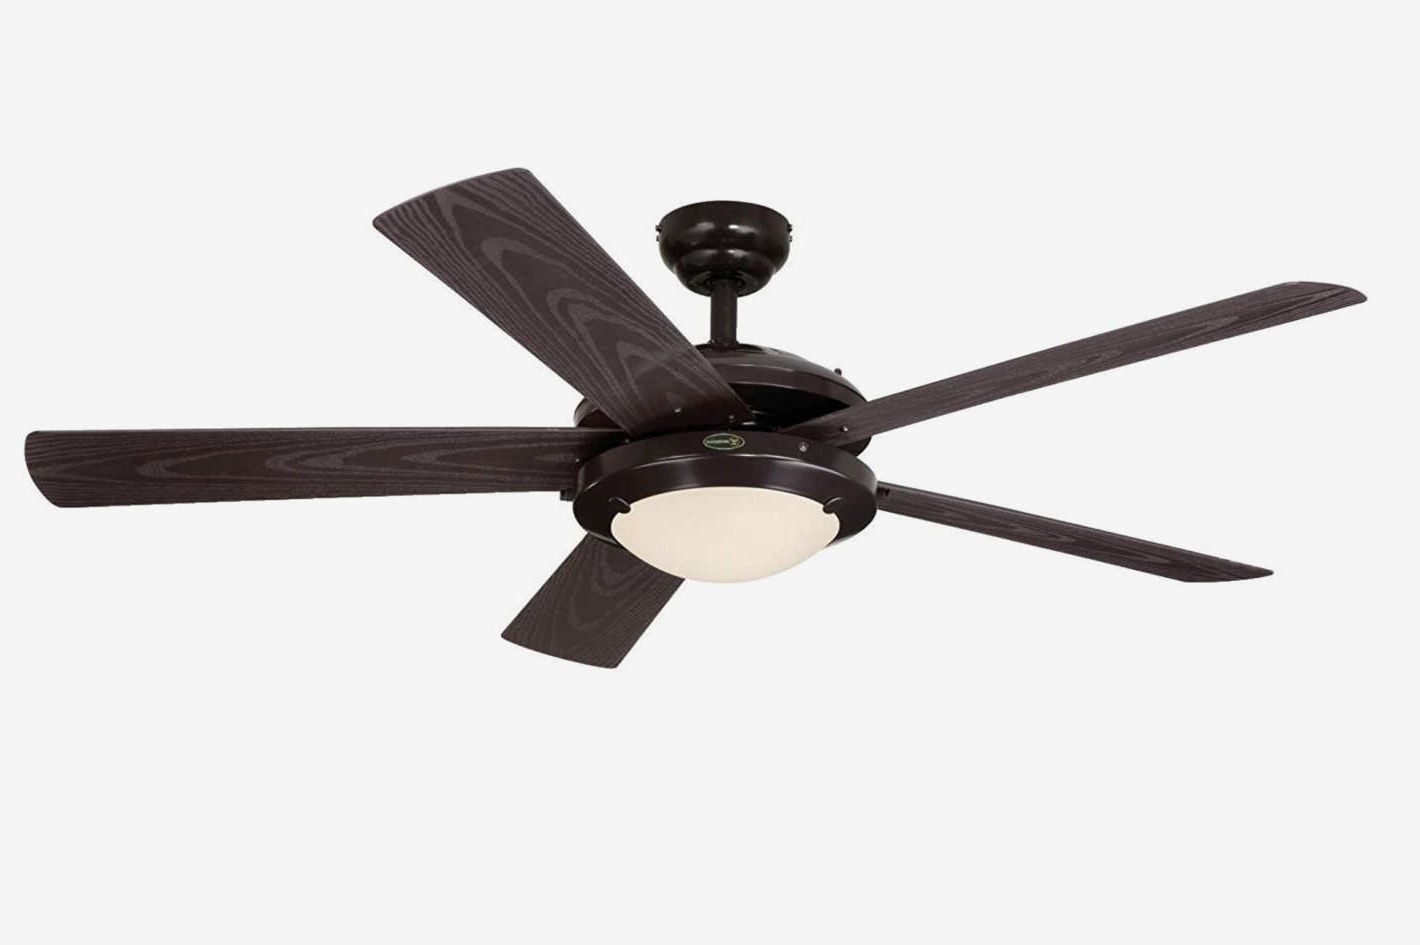 The 9 Best Ceiling Fans On Amazon 2018 For 2019 Outdoor Ceiling Fans Under $ (View 7 of 20)